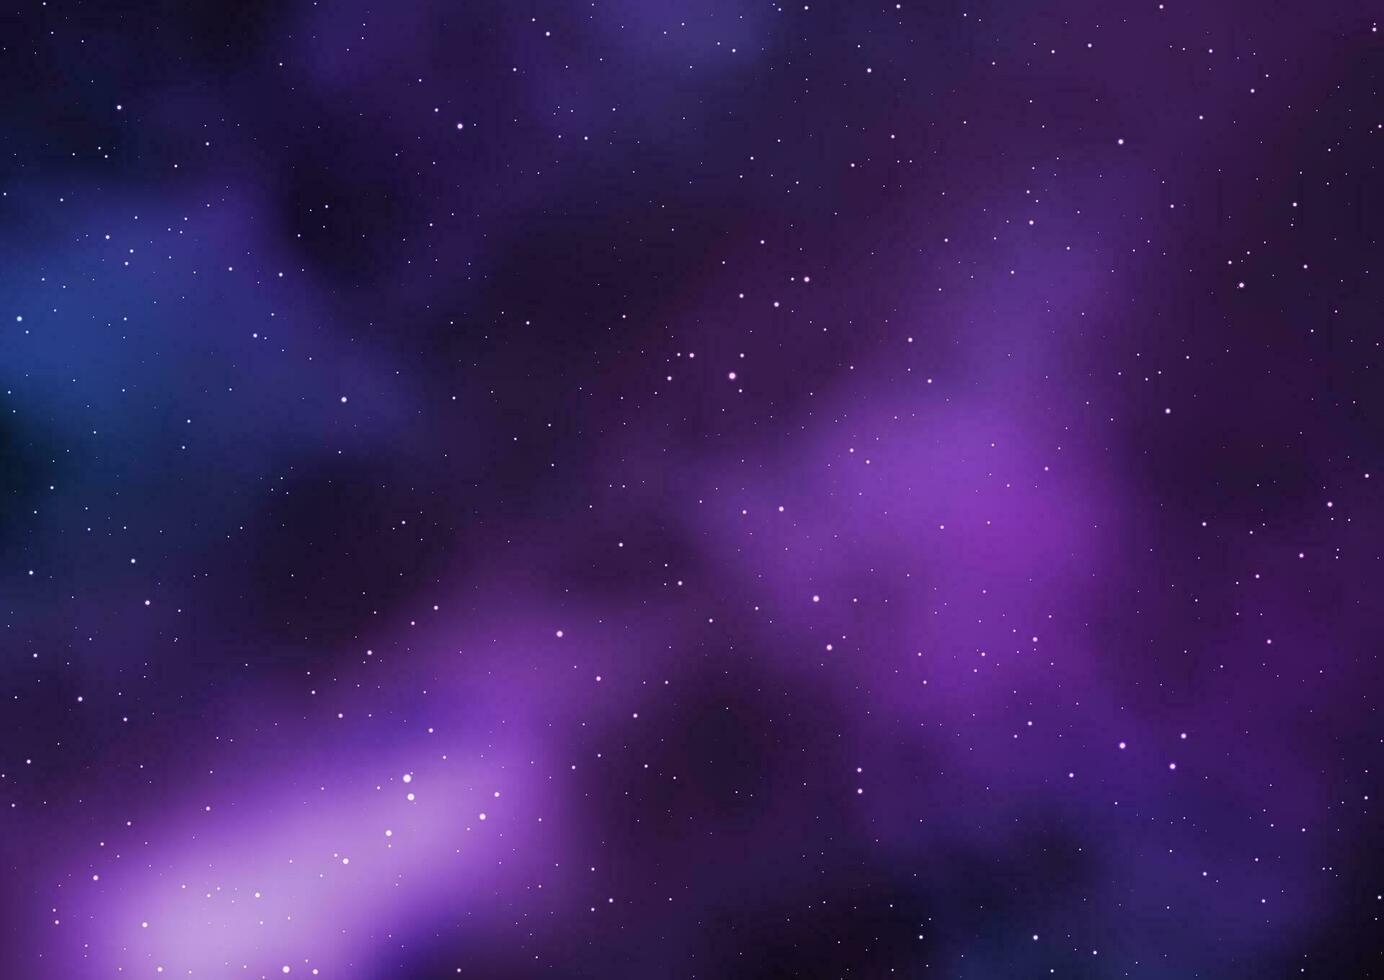 abstract background with a space sky design vector